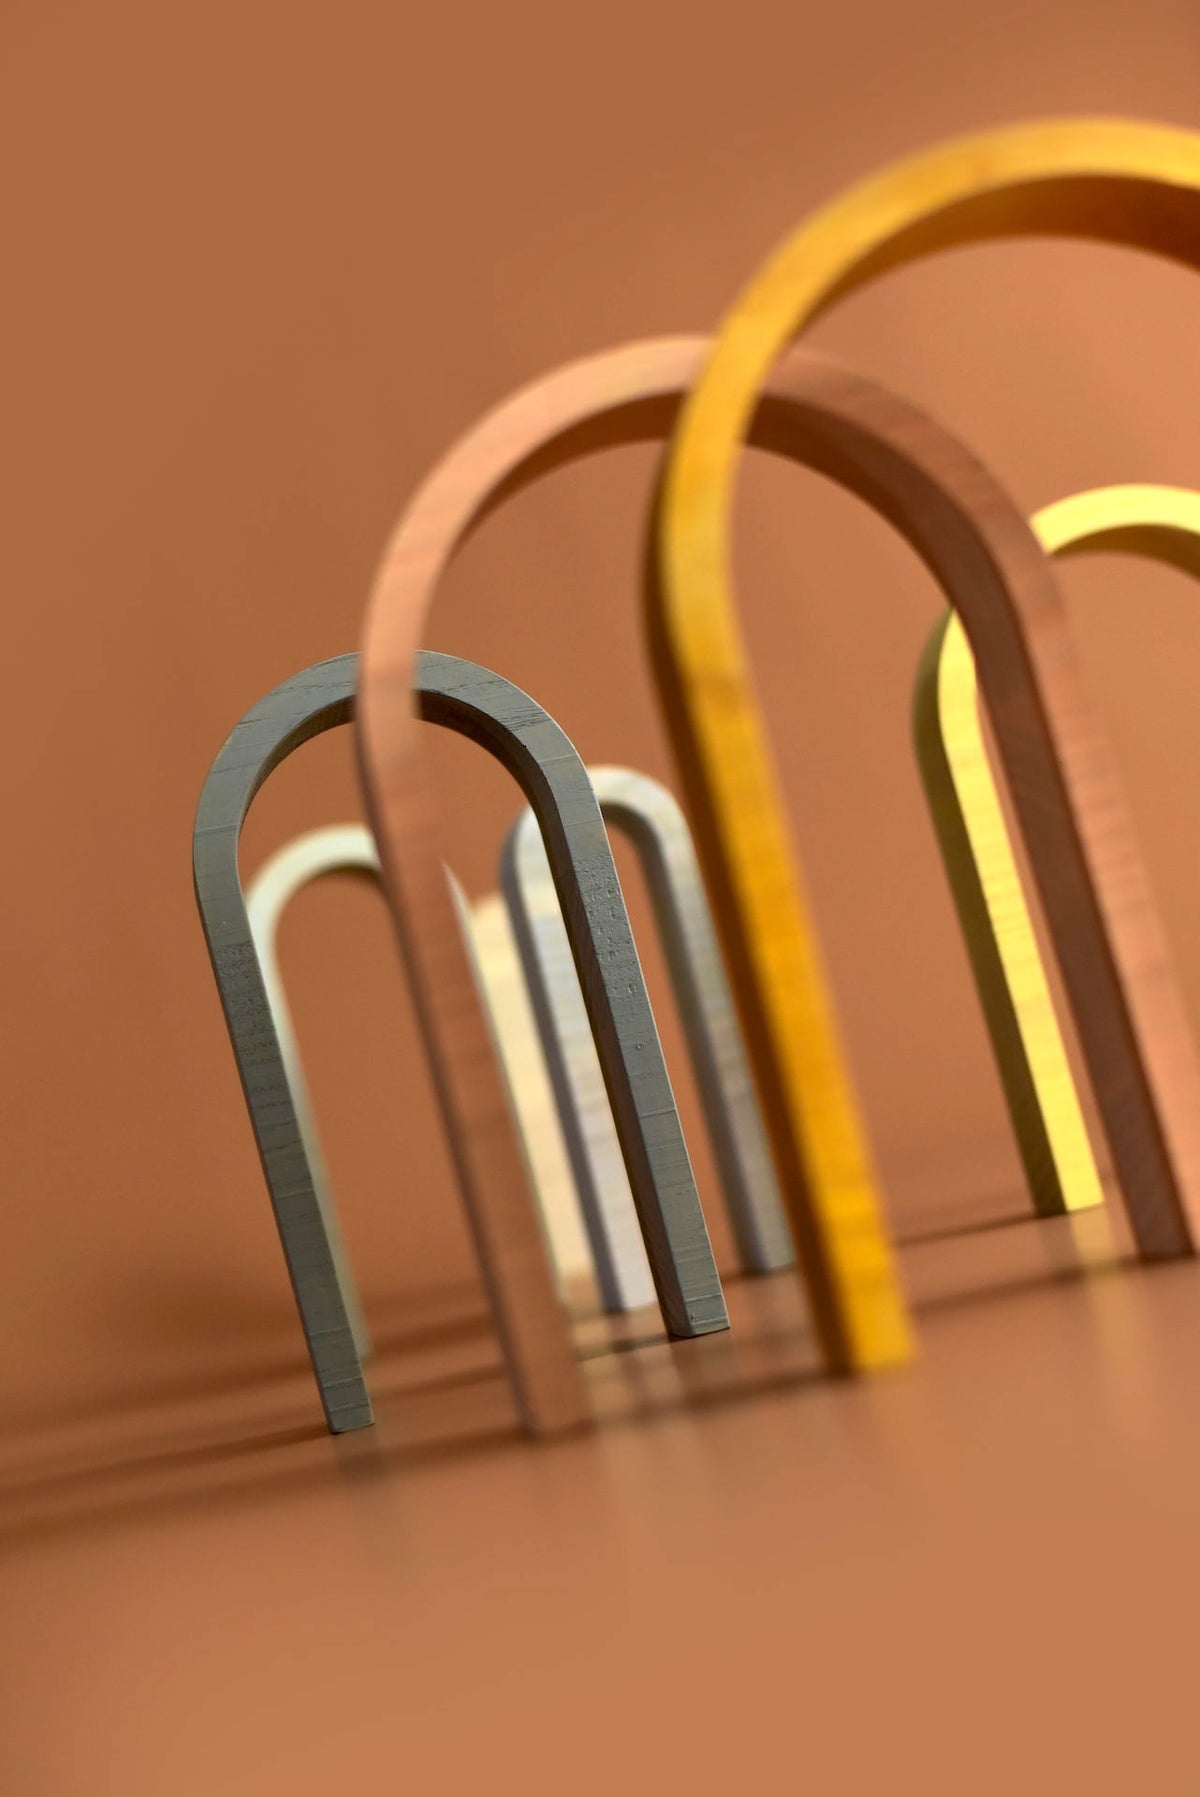 A set of Big Rainbow - Pastel wooden arches on a brown background by MinMin Copenhagen.